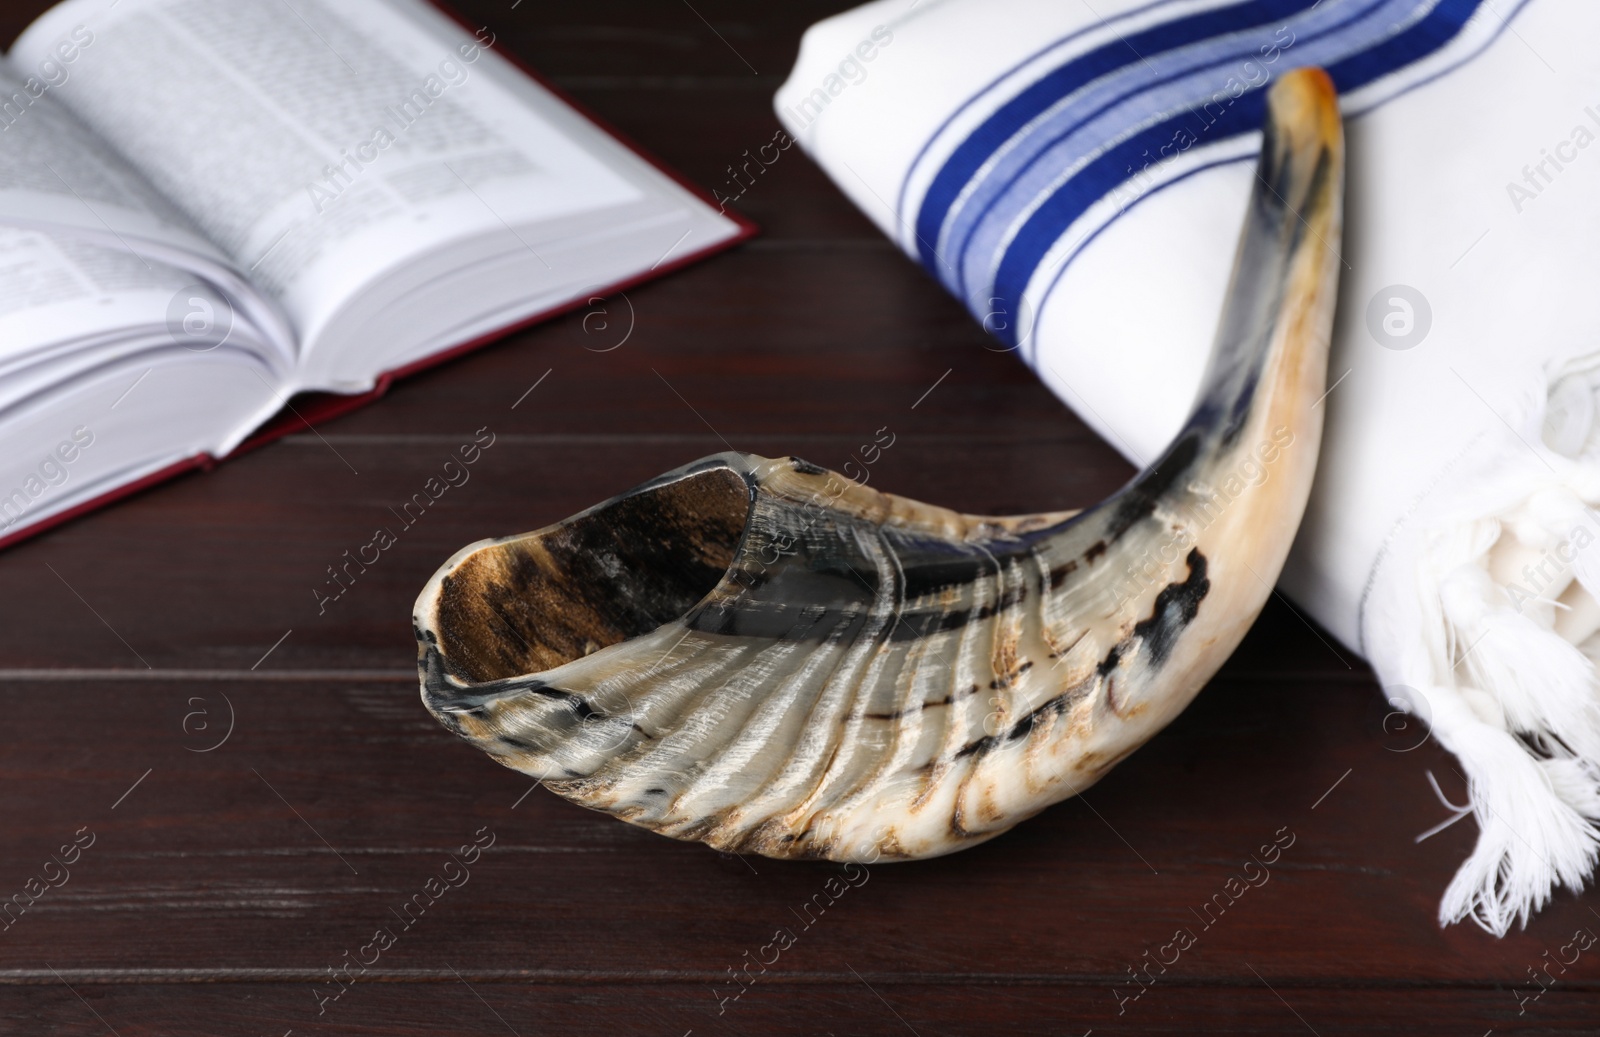 Photo of Shofar, Tallit and open Torah book on wooden table. Rosh Hashanah holiday attributes